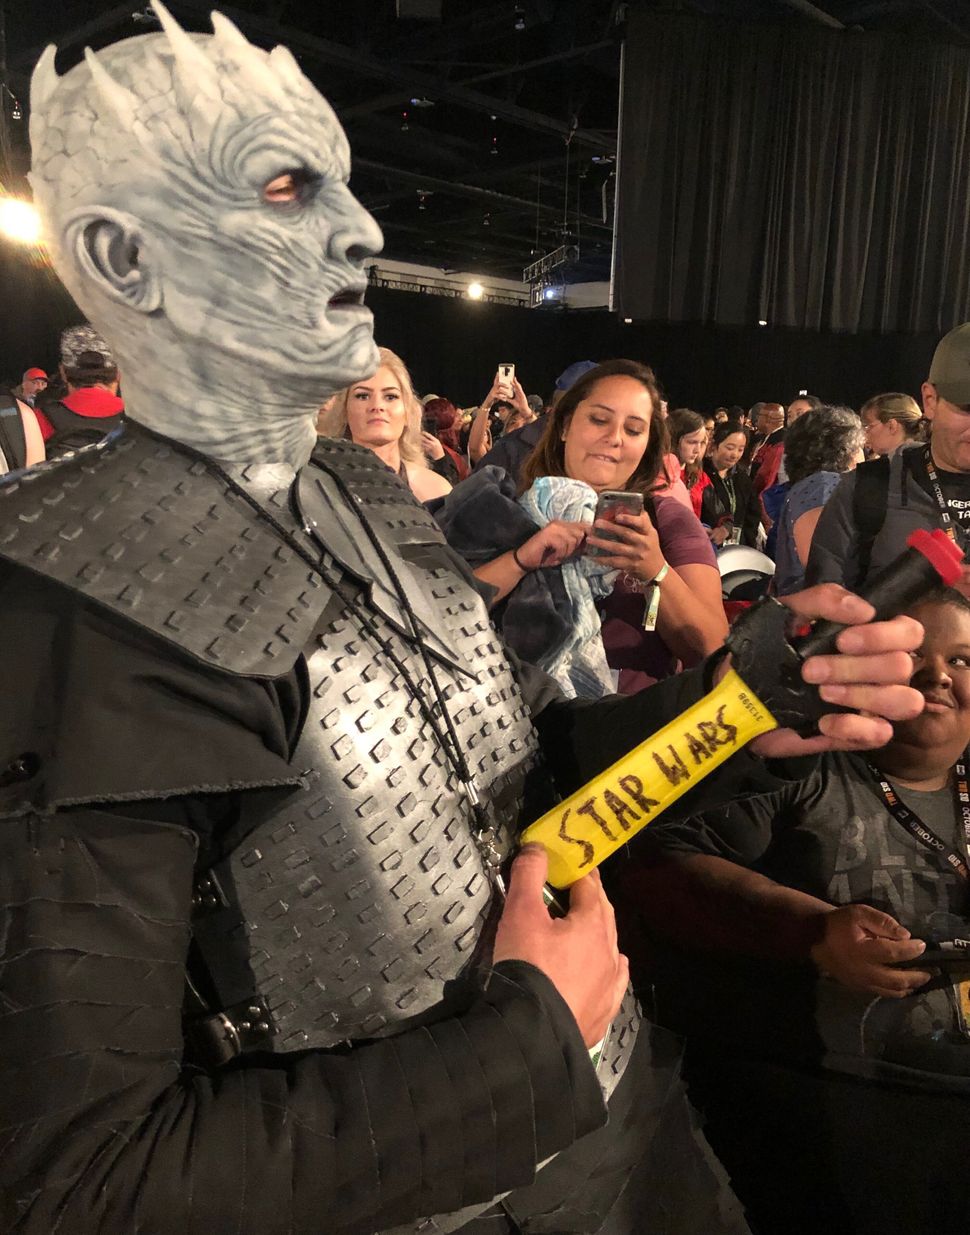 A Night King cosplayer with a dagger saying &ldquo;Star Wars&rdquo; on the side at Comic-Con. Fans had accused the showrunner